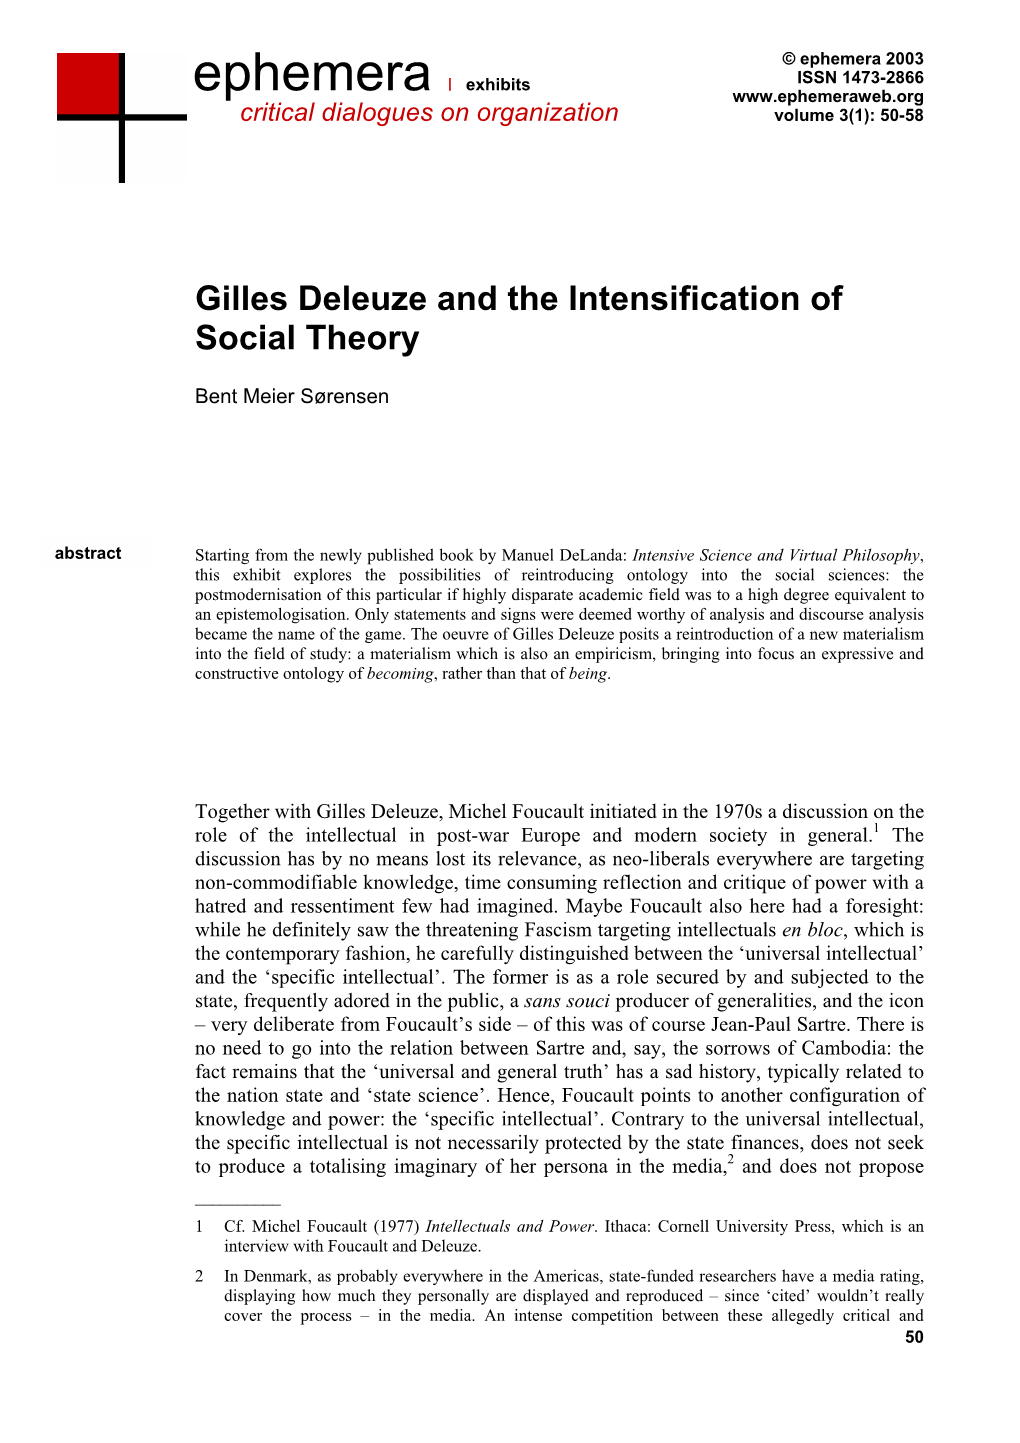 Gilles Deleuze and the Intensification of Social Theory